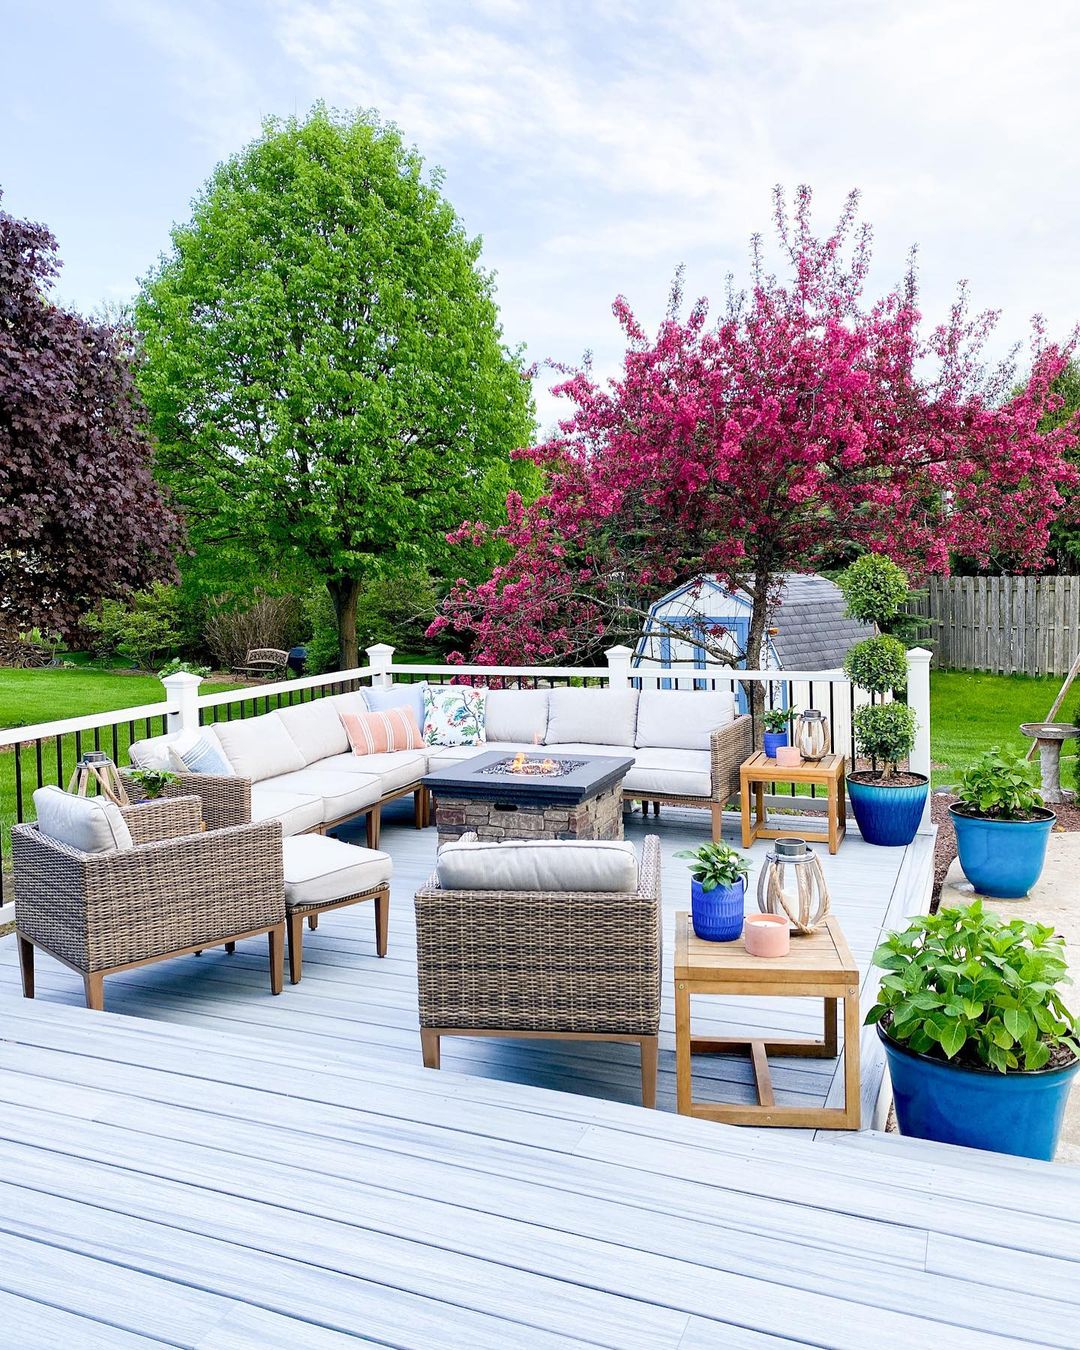 Backyard Extended Deck with Lots of Seating. Photo by Instagram user @searing.styles